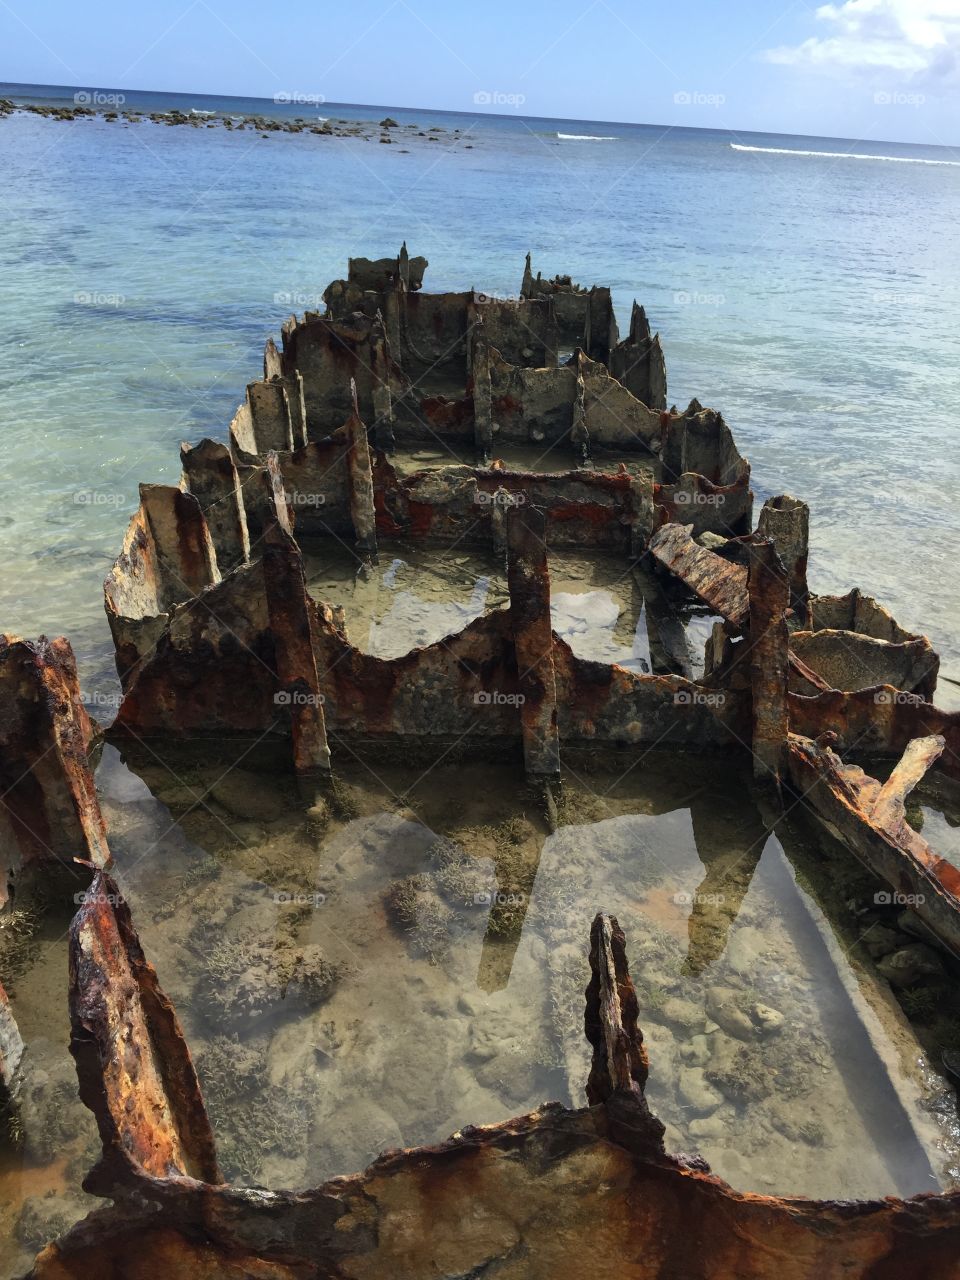 Wreckage turned into man made tide pool.